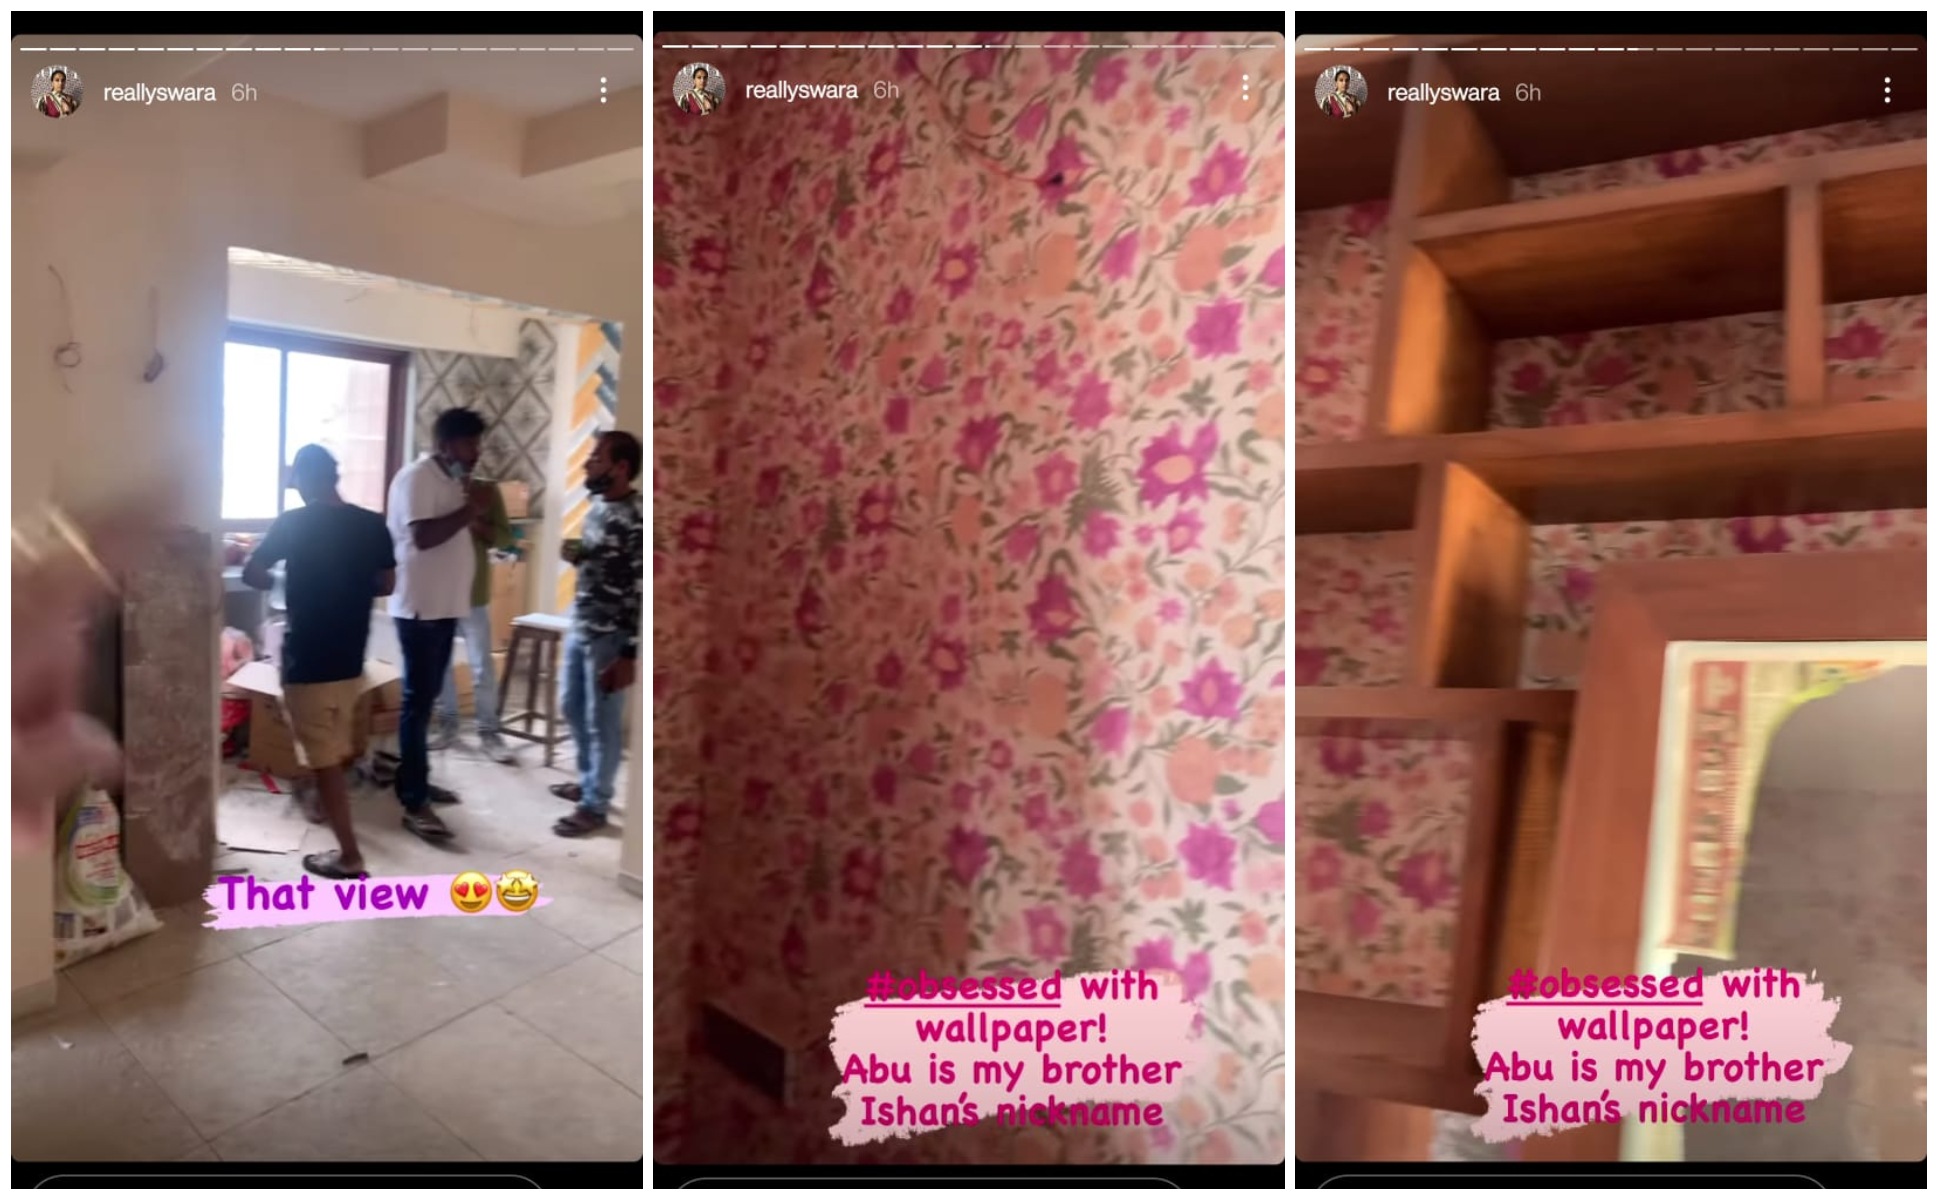 Swara Bhasker’s home has an open kitchen (pic 1) and a study with floral wallpaper and a wall-to-wall bookshelf (pics 2 and 3).